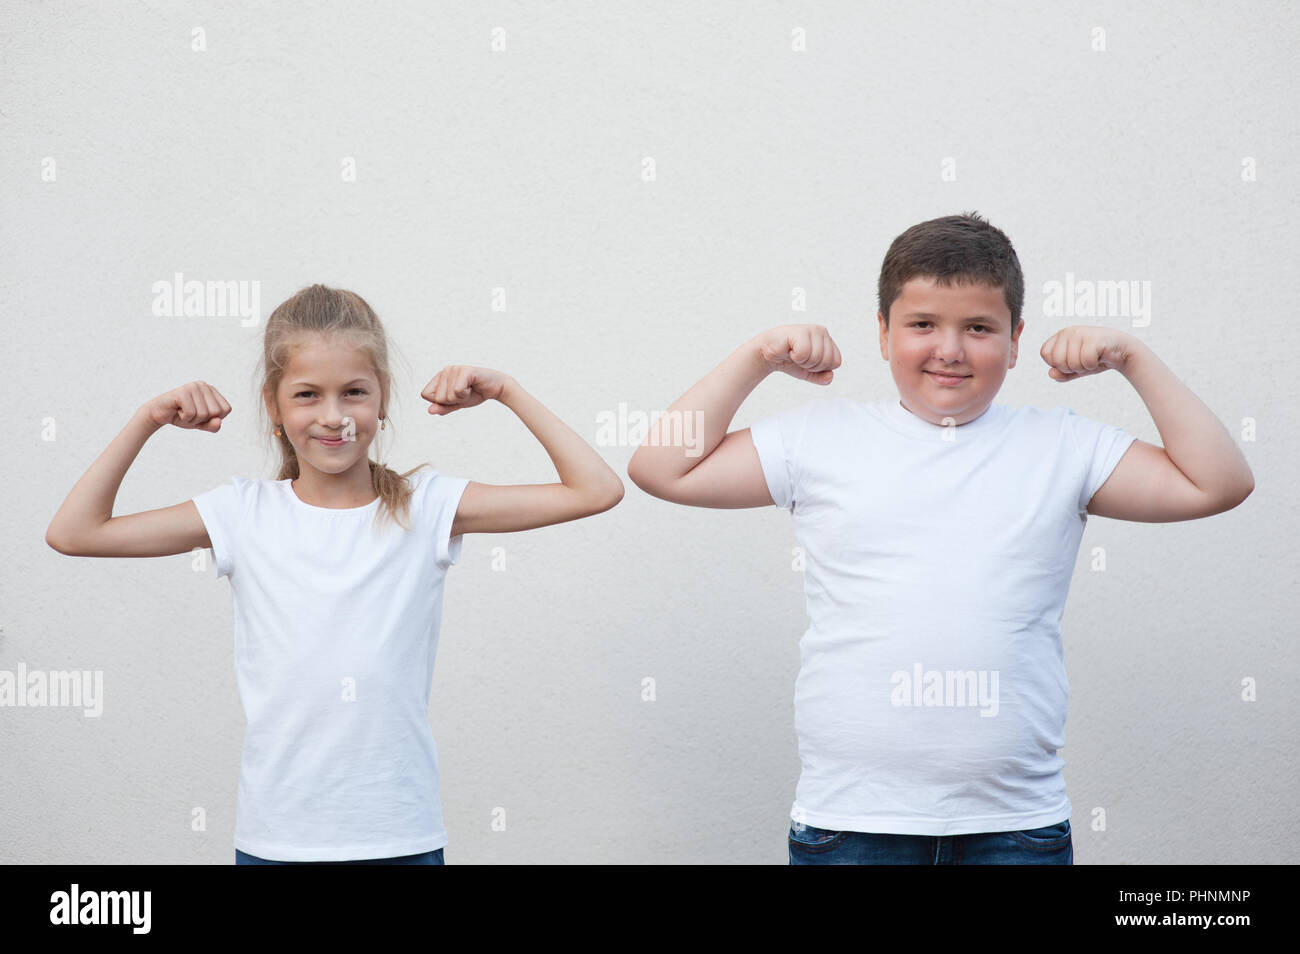 two children little thin girl and thick boy showing their muscle on copyspace background Stock Photo